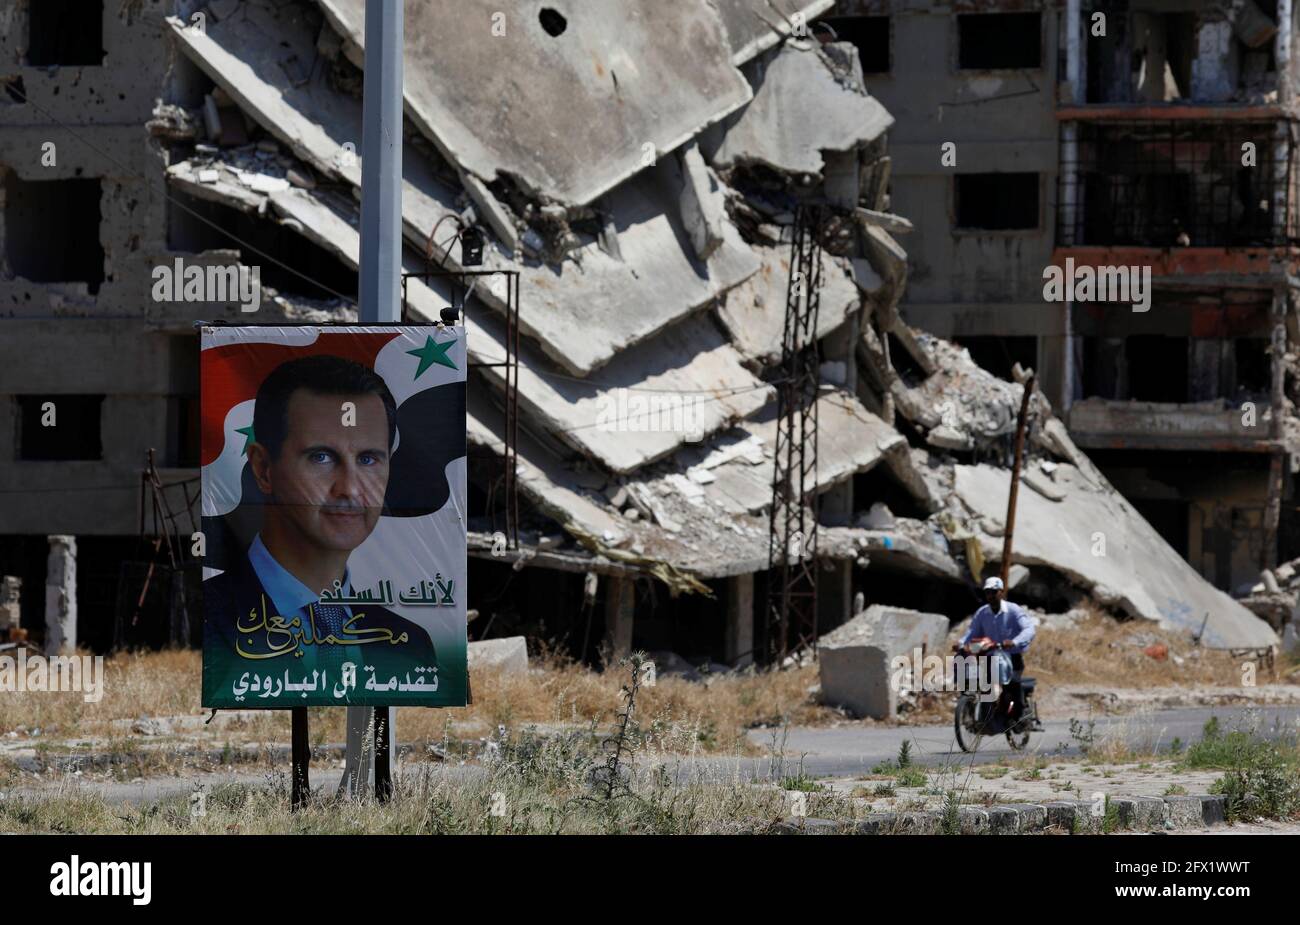 A poster depciting Syria's President Bashar al-Assad is pictured in front of damaged buildings, ahead of the May 26 presidential election, in Homs, Syria May 23, 2021.  Picture taken May 23, 2021. REUTERS/Omar Sanadiki Stock Photo